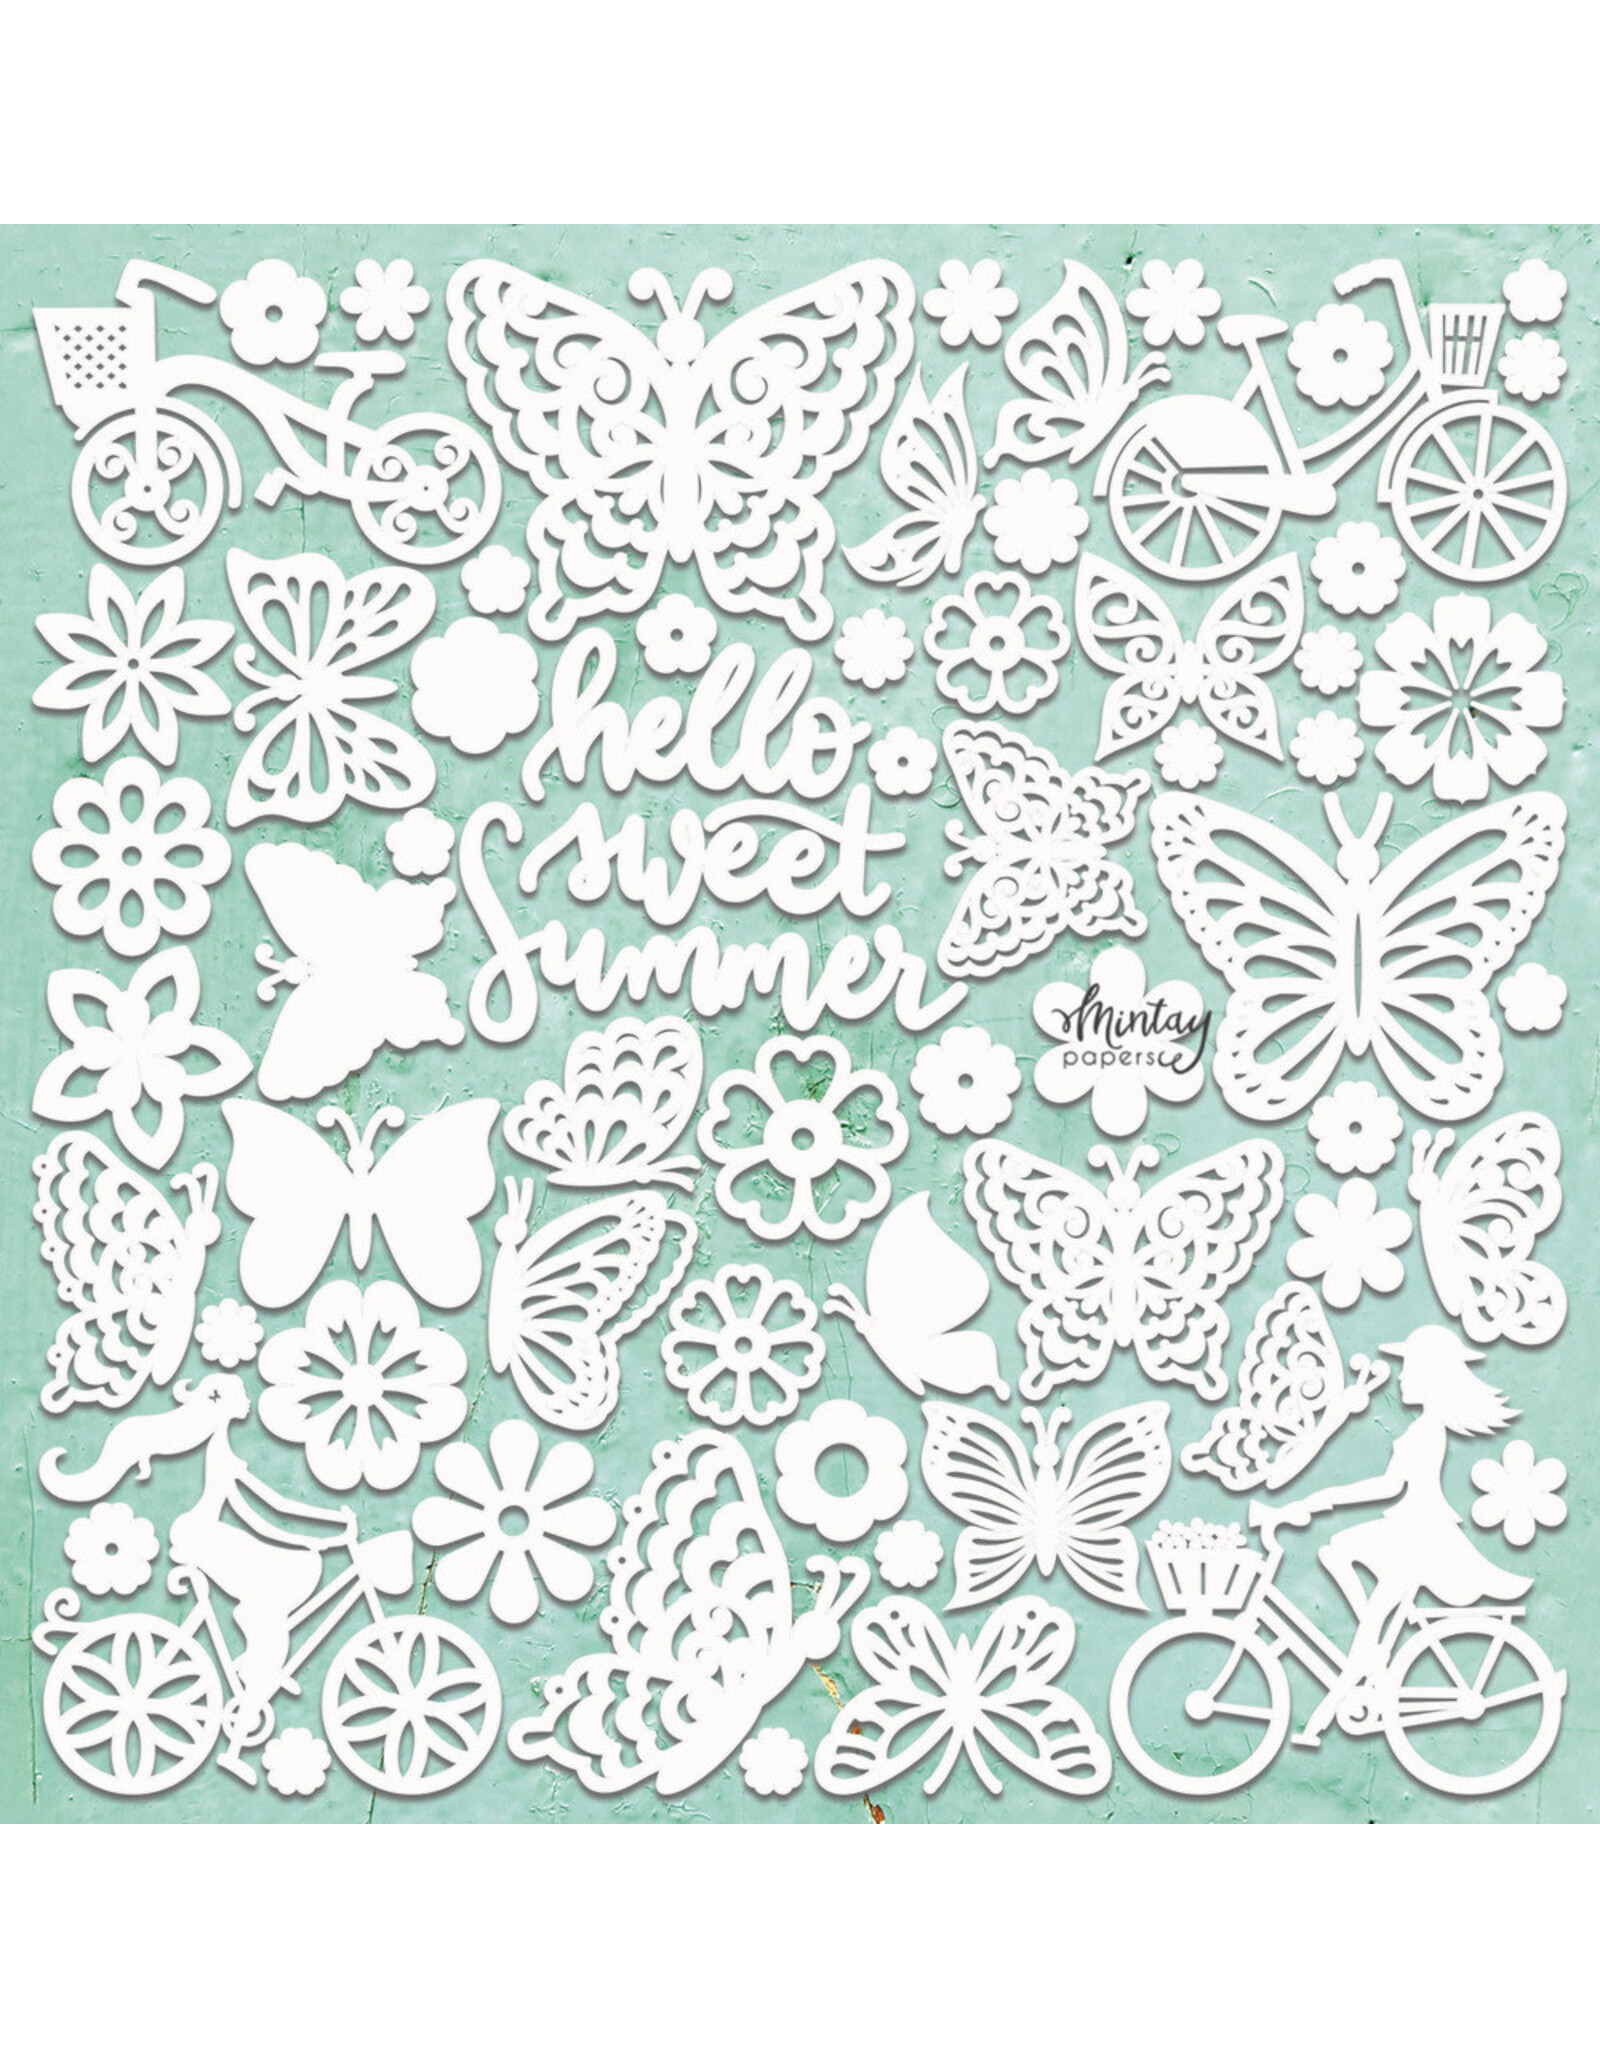 MINTAY MINTAY CHIPPIES - DECOR SUMMERTIME 12x12 CHIPBOARD